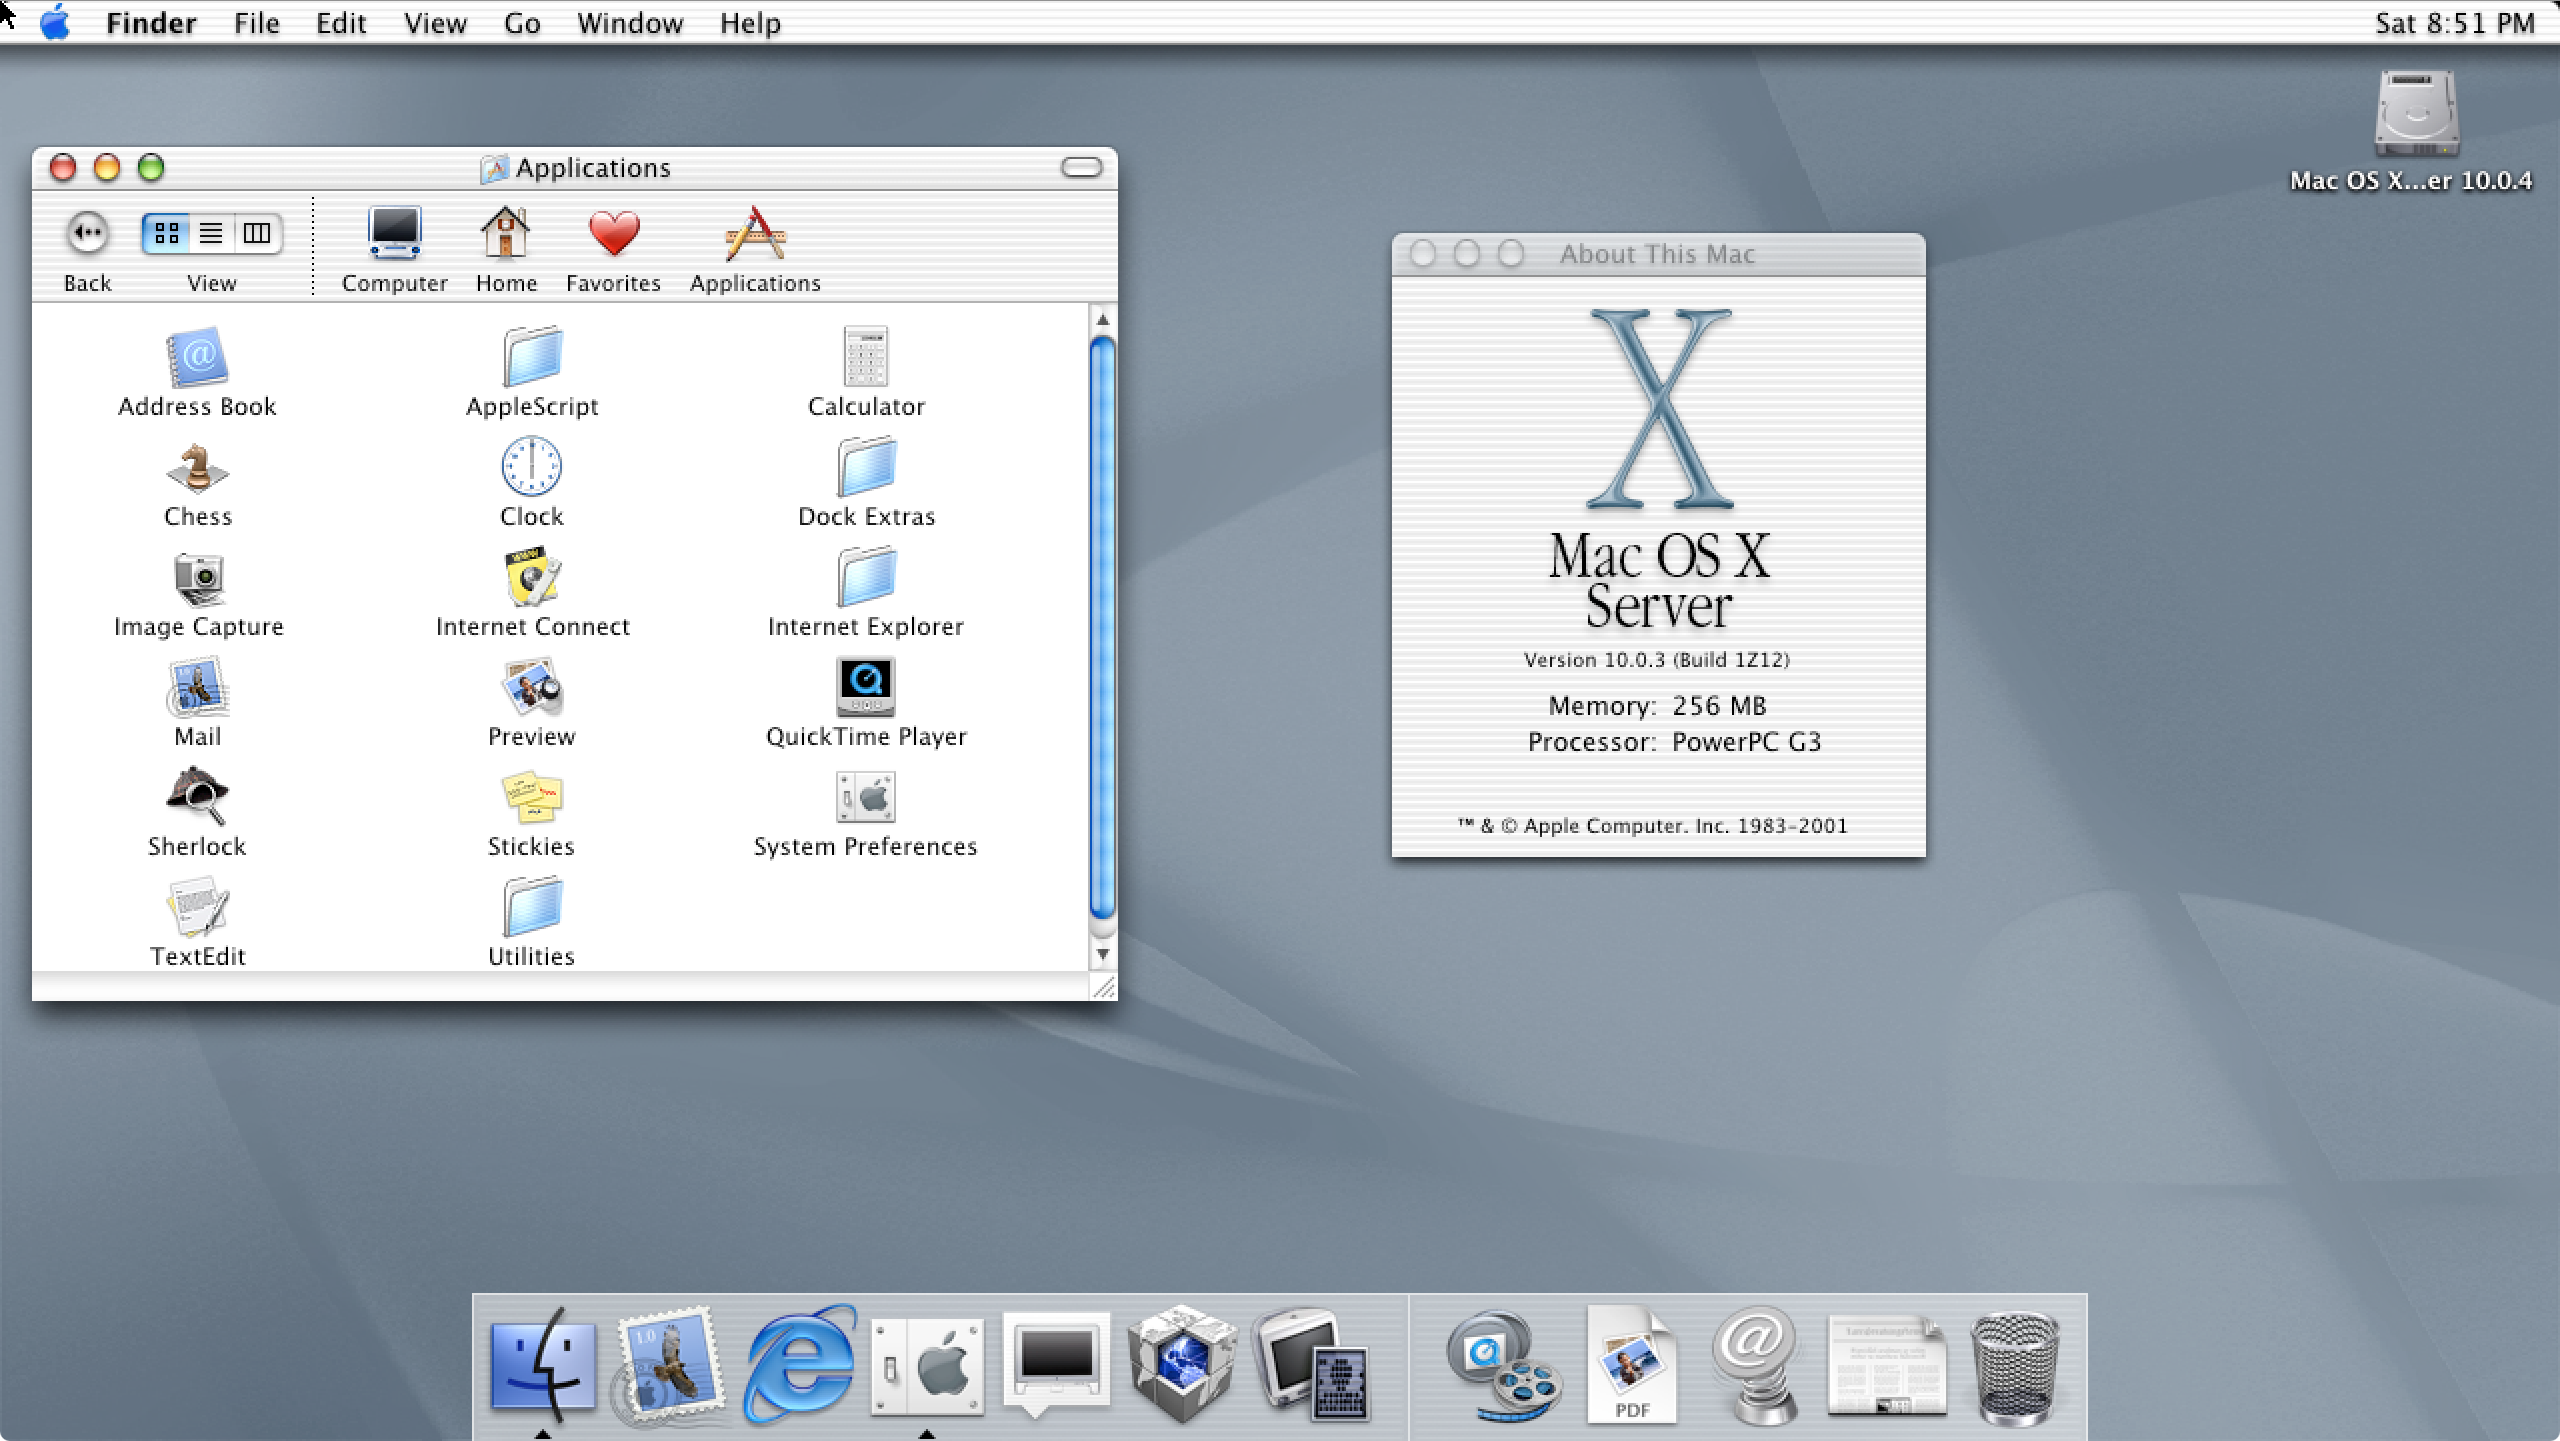 java for mac os x version 10.6